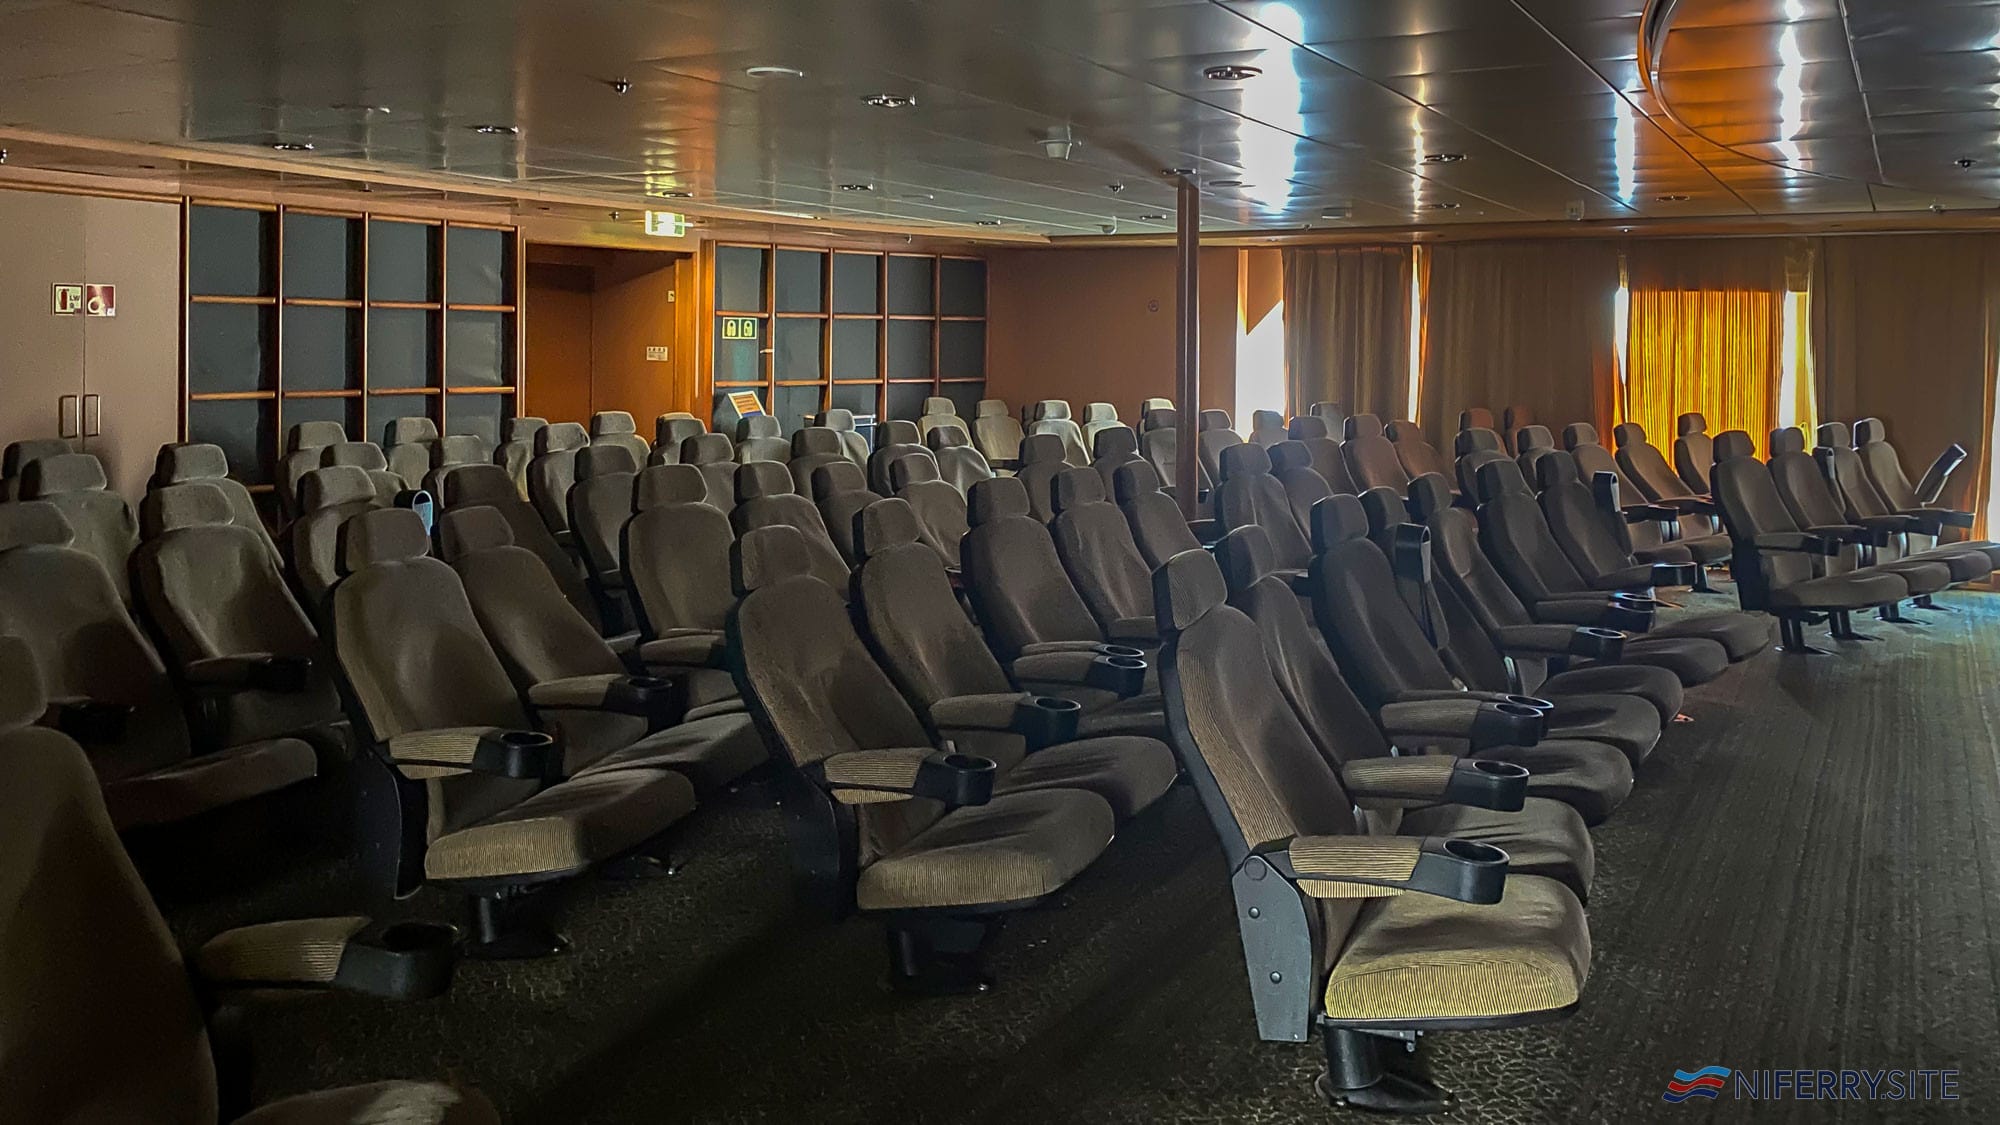 Reclining seats in the conference room / TV lounge, BLUE STAR 1. Image: © Steven Tarbox.